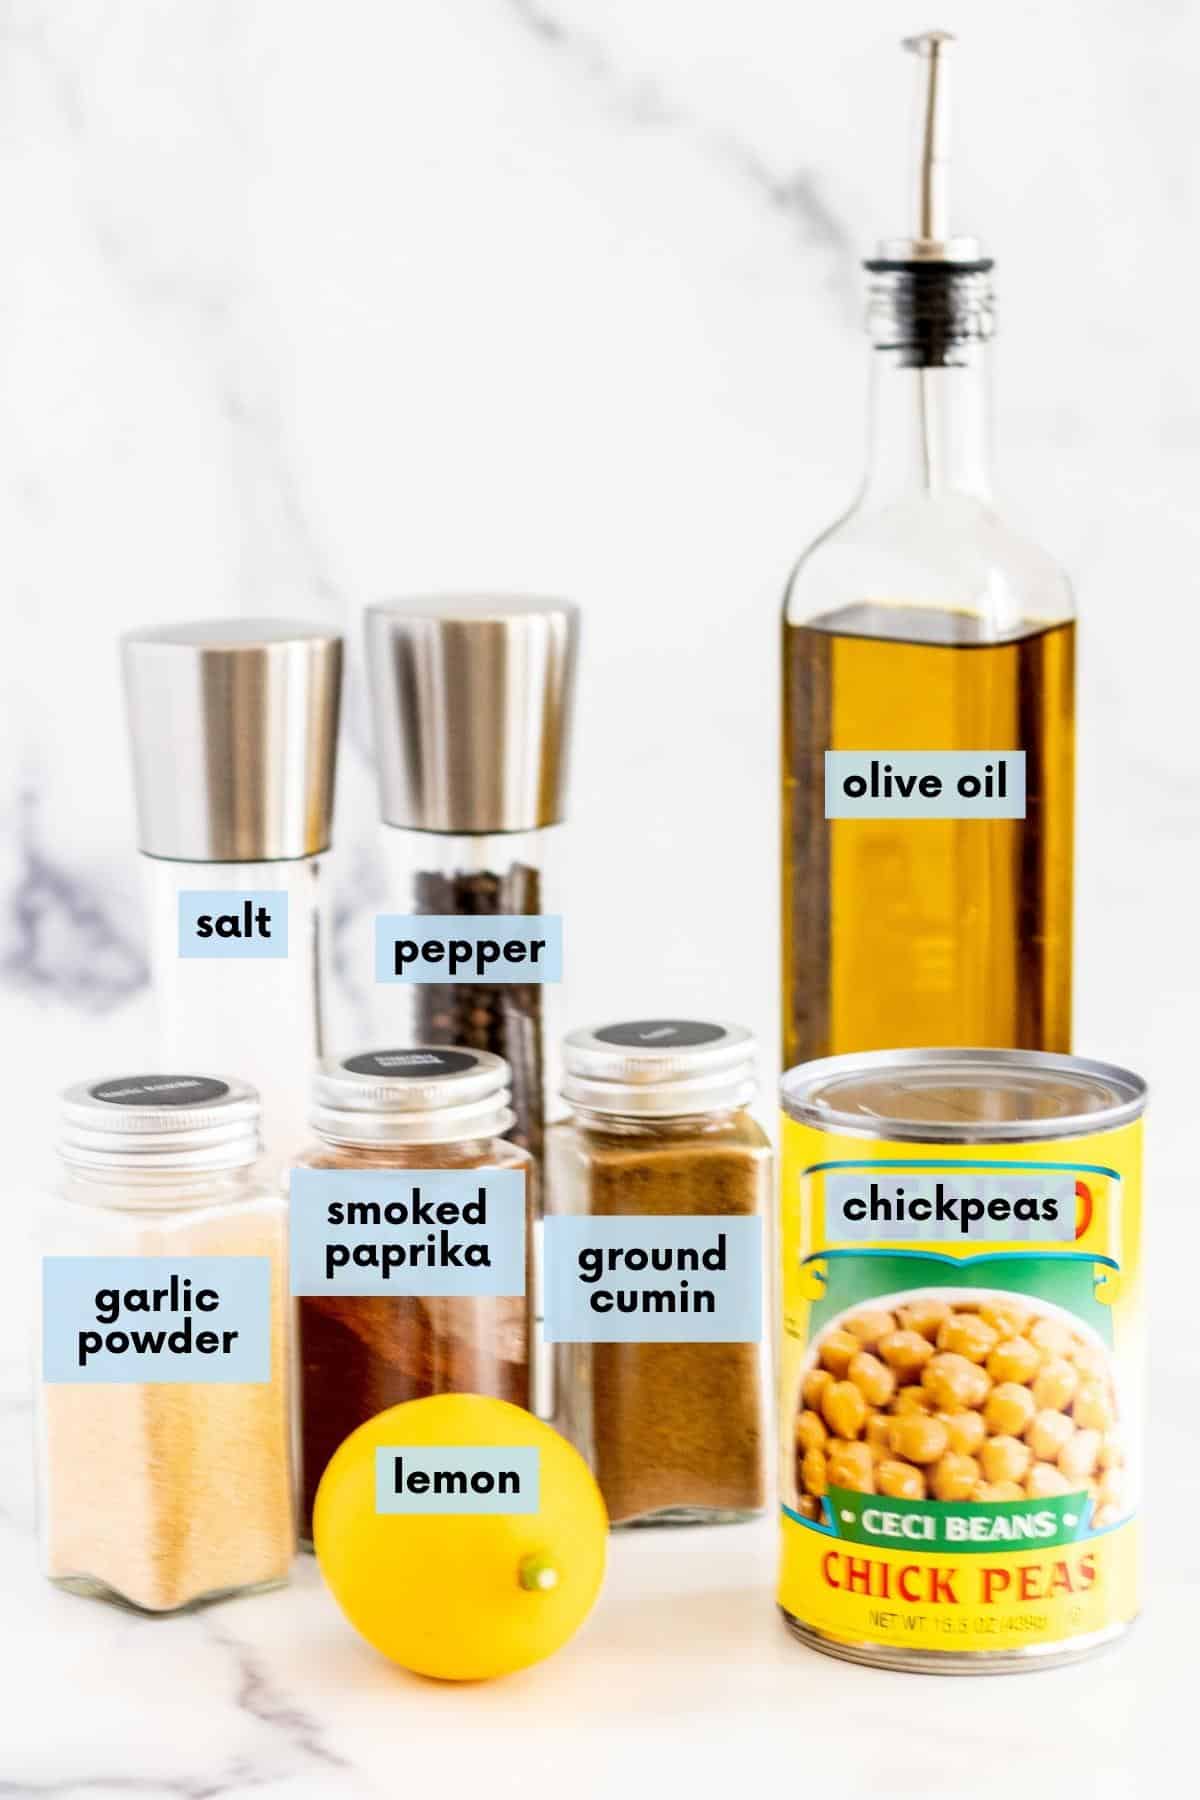 Jars of garlic powder, smoked paprika, and ground cumin, salt and pepper shakers, a lemon, a can of chickpeas, and a bottle of olive oil.